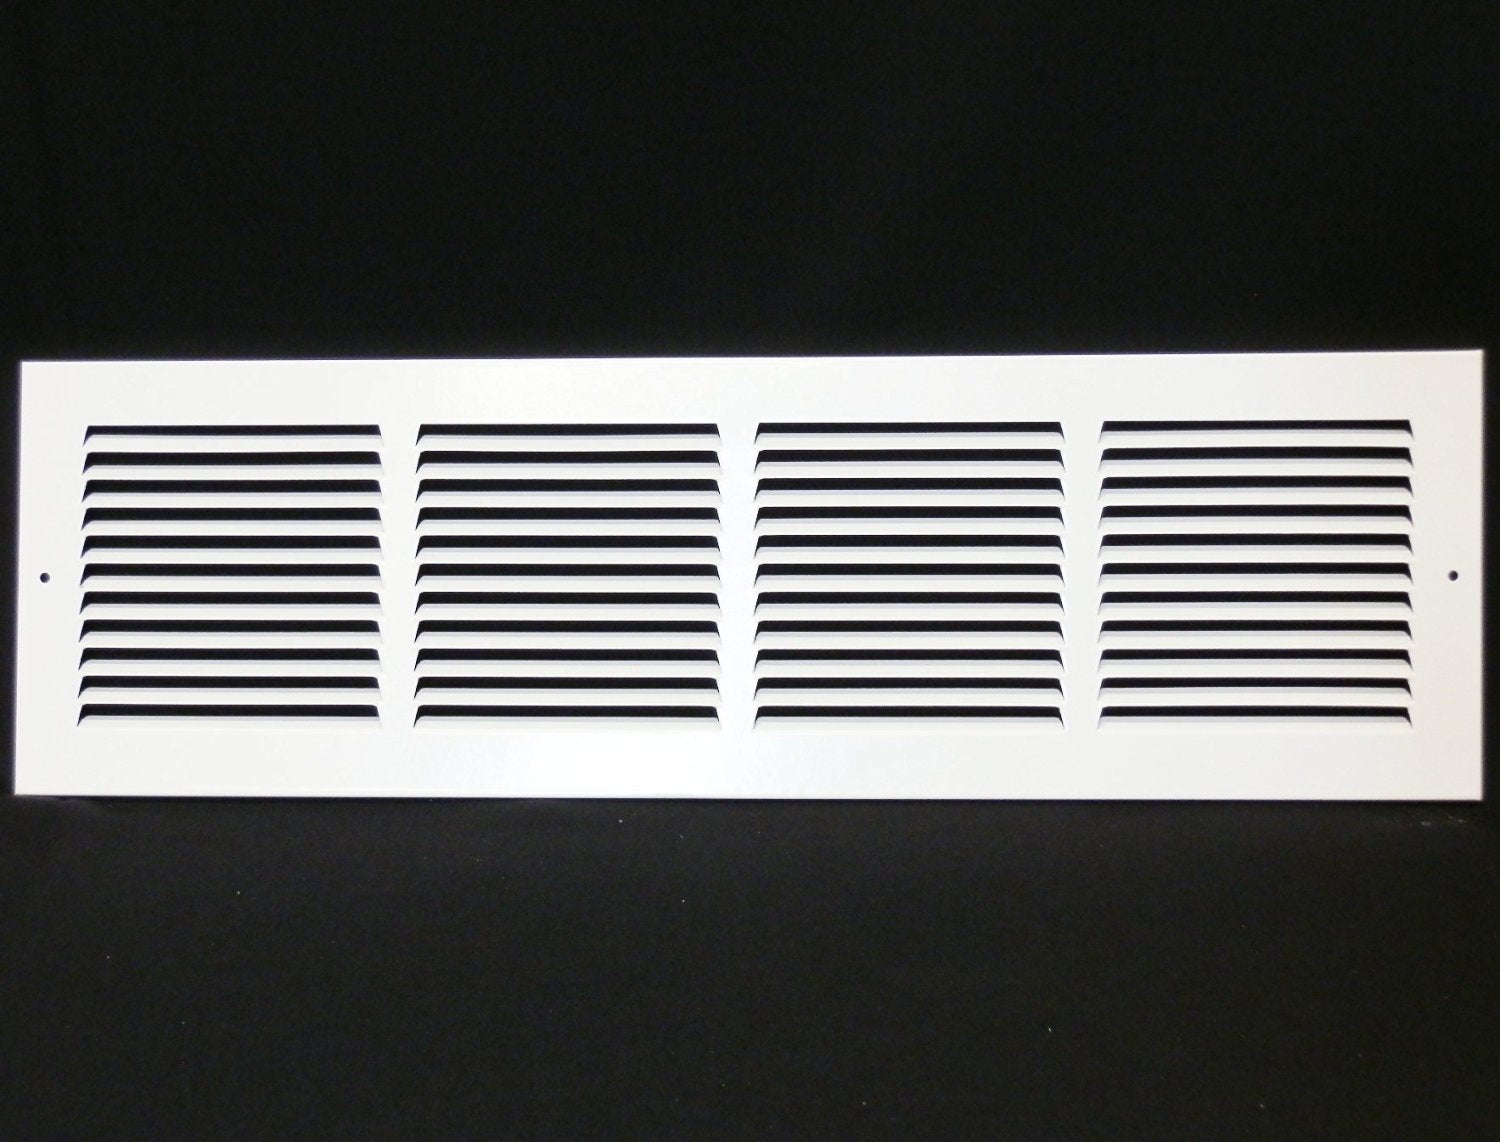 24" X 6" Air Vent Return Grilles - Sidewall and Ceiling - Steel